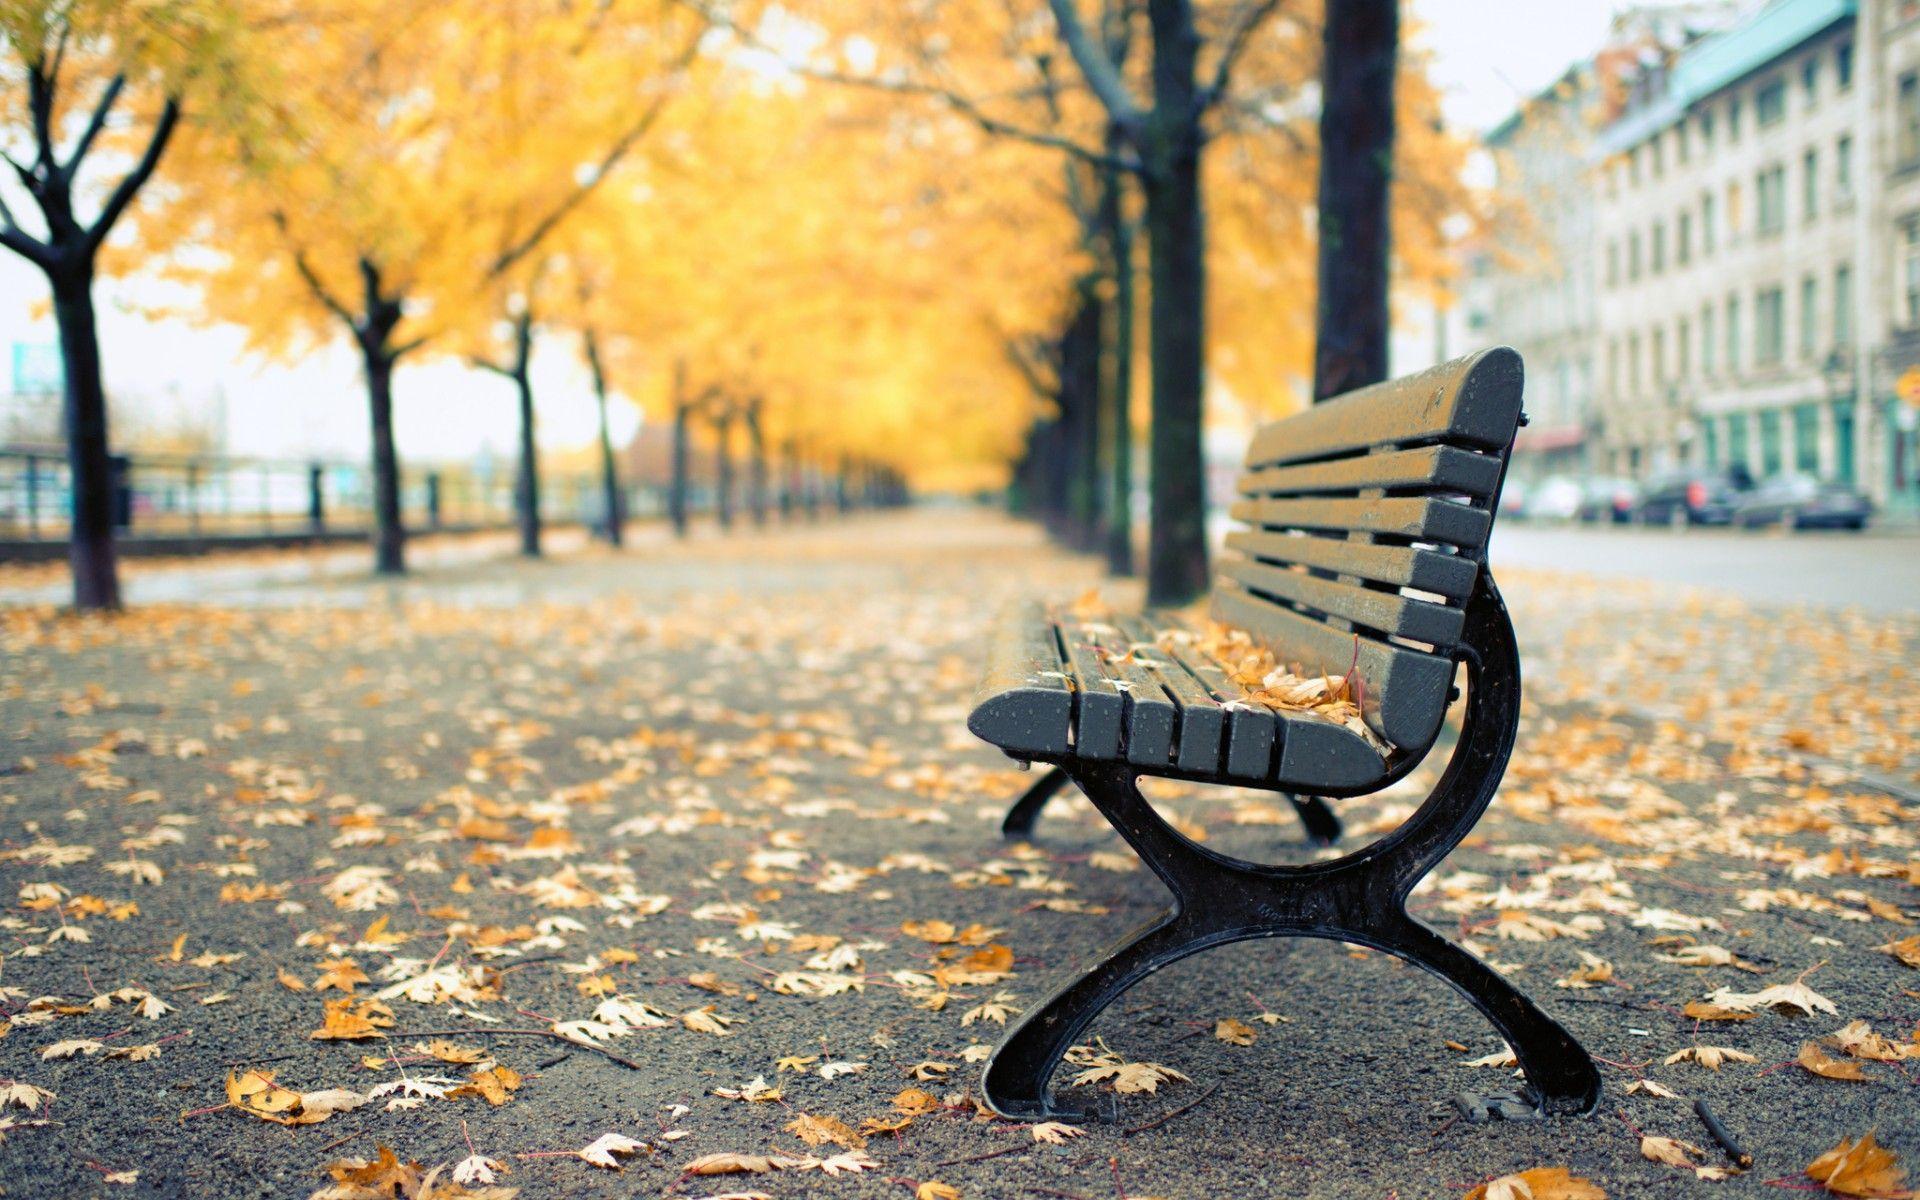 Bench Wallpaper, HQ Definition Bench Wallpaper for Free, Pics